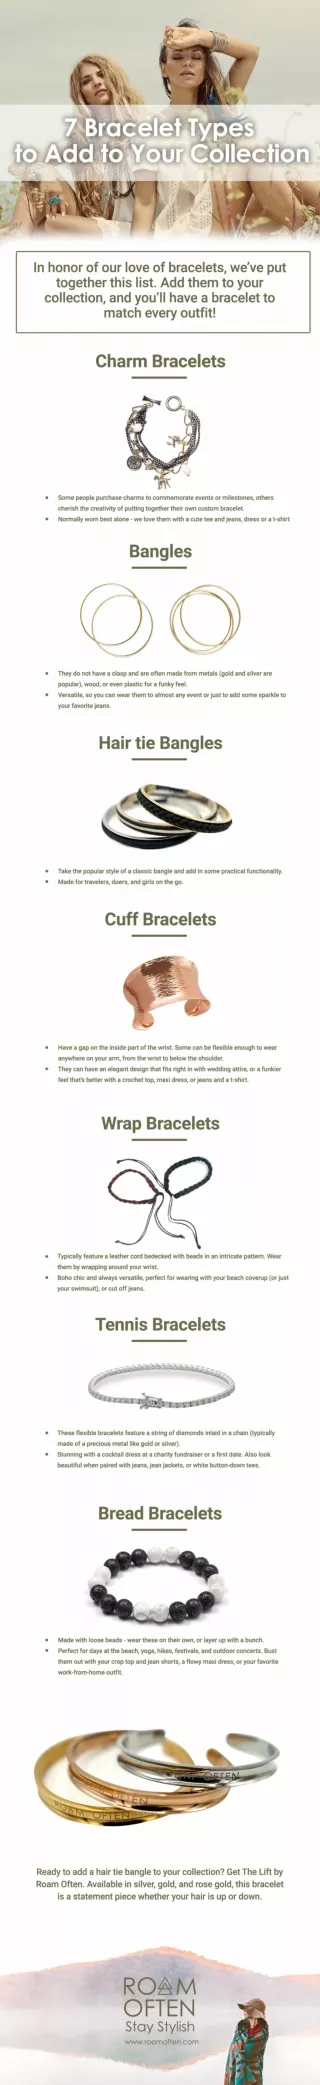 7 Bracelet Types to Add to Your Collection